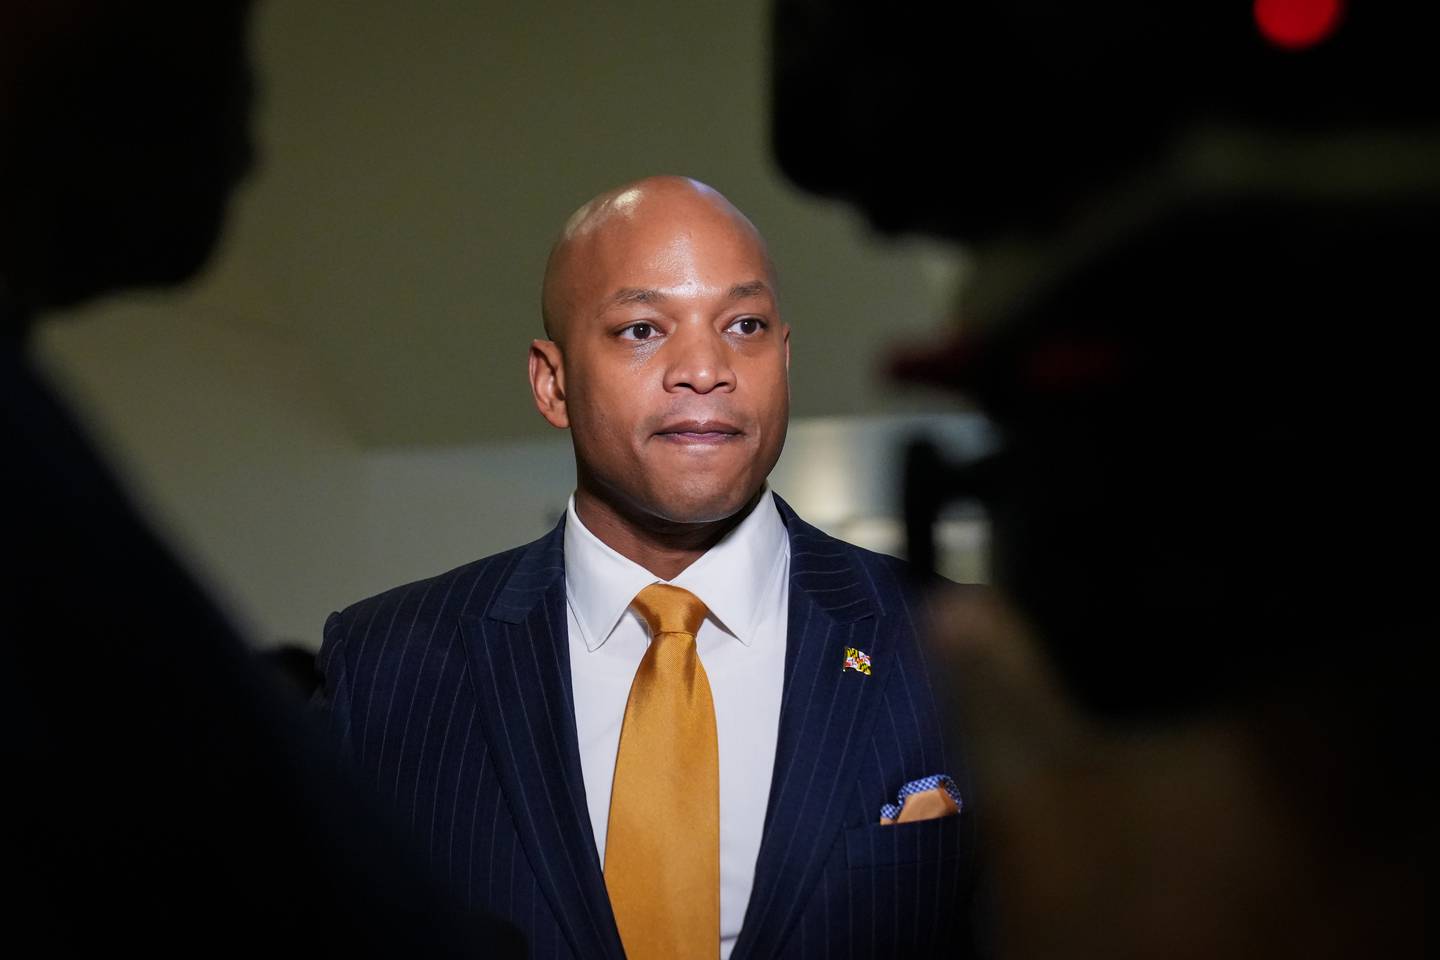 Maryland Gov. Wes Moore meets with reporters after testifying in favor of the Family Prosperity Act on 2/16/23 during a meeting of the House of Delegates Ways and Means committee in Annapolis.